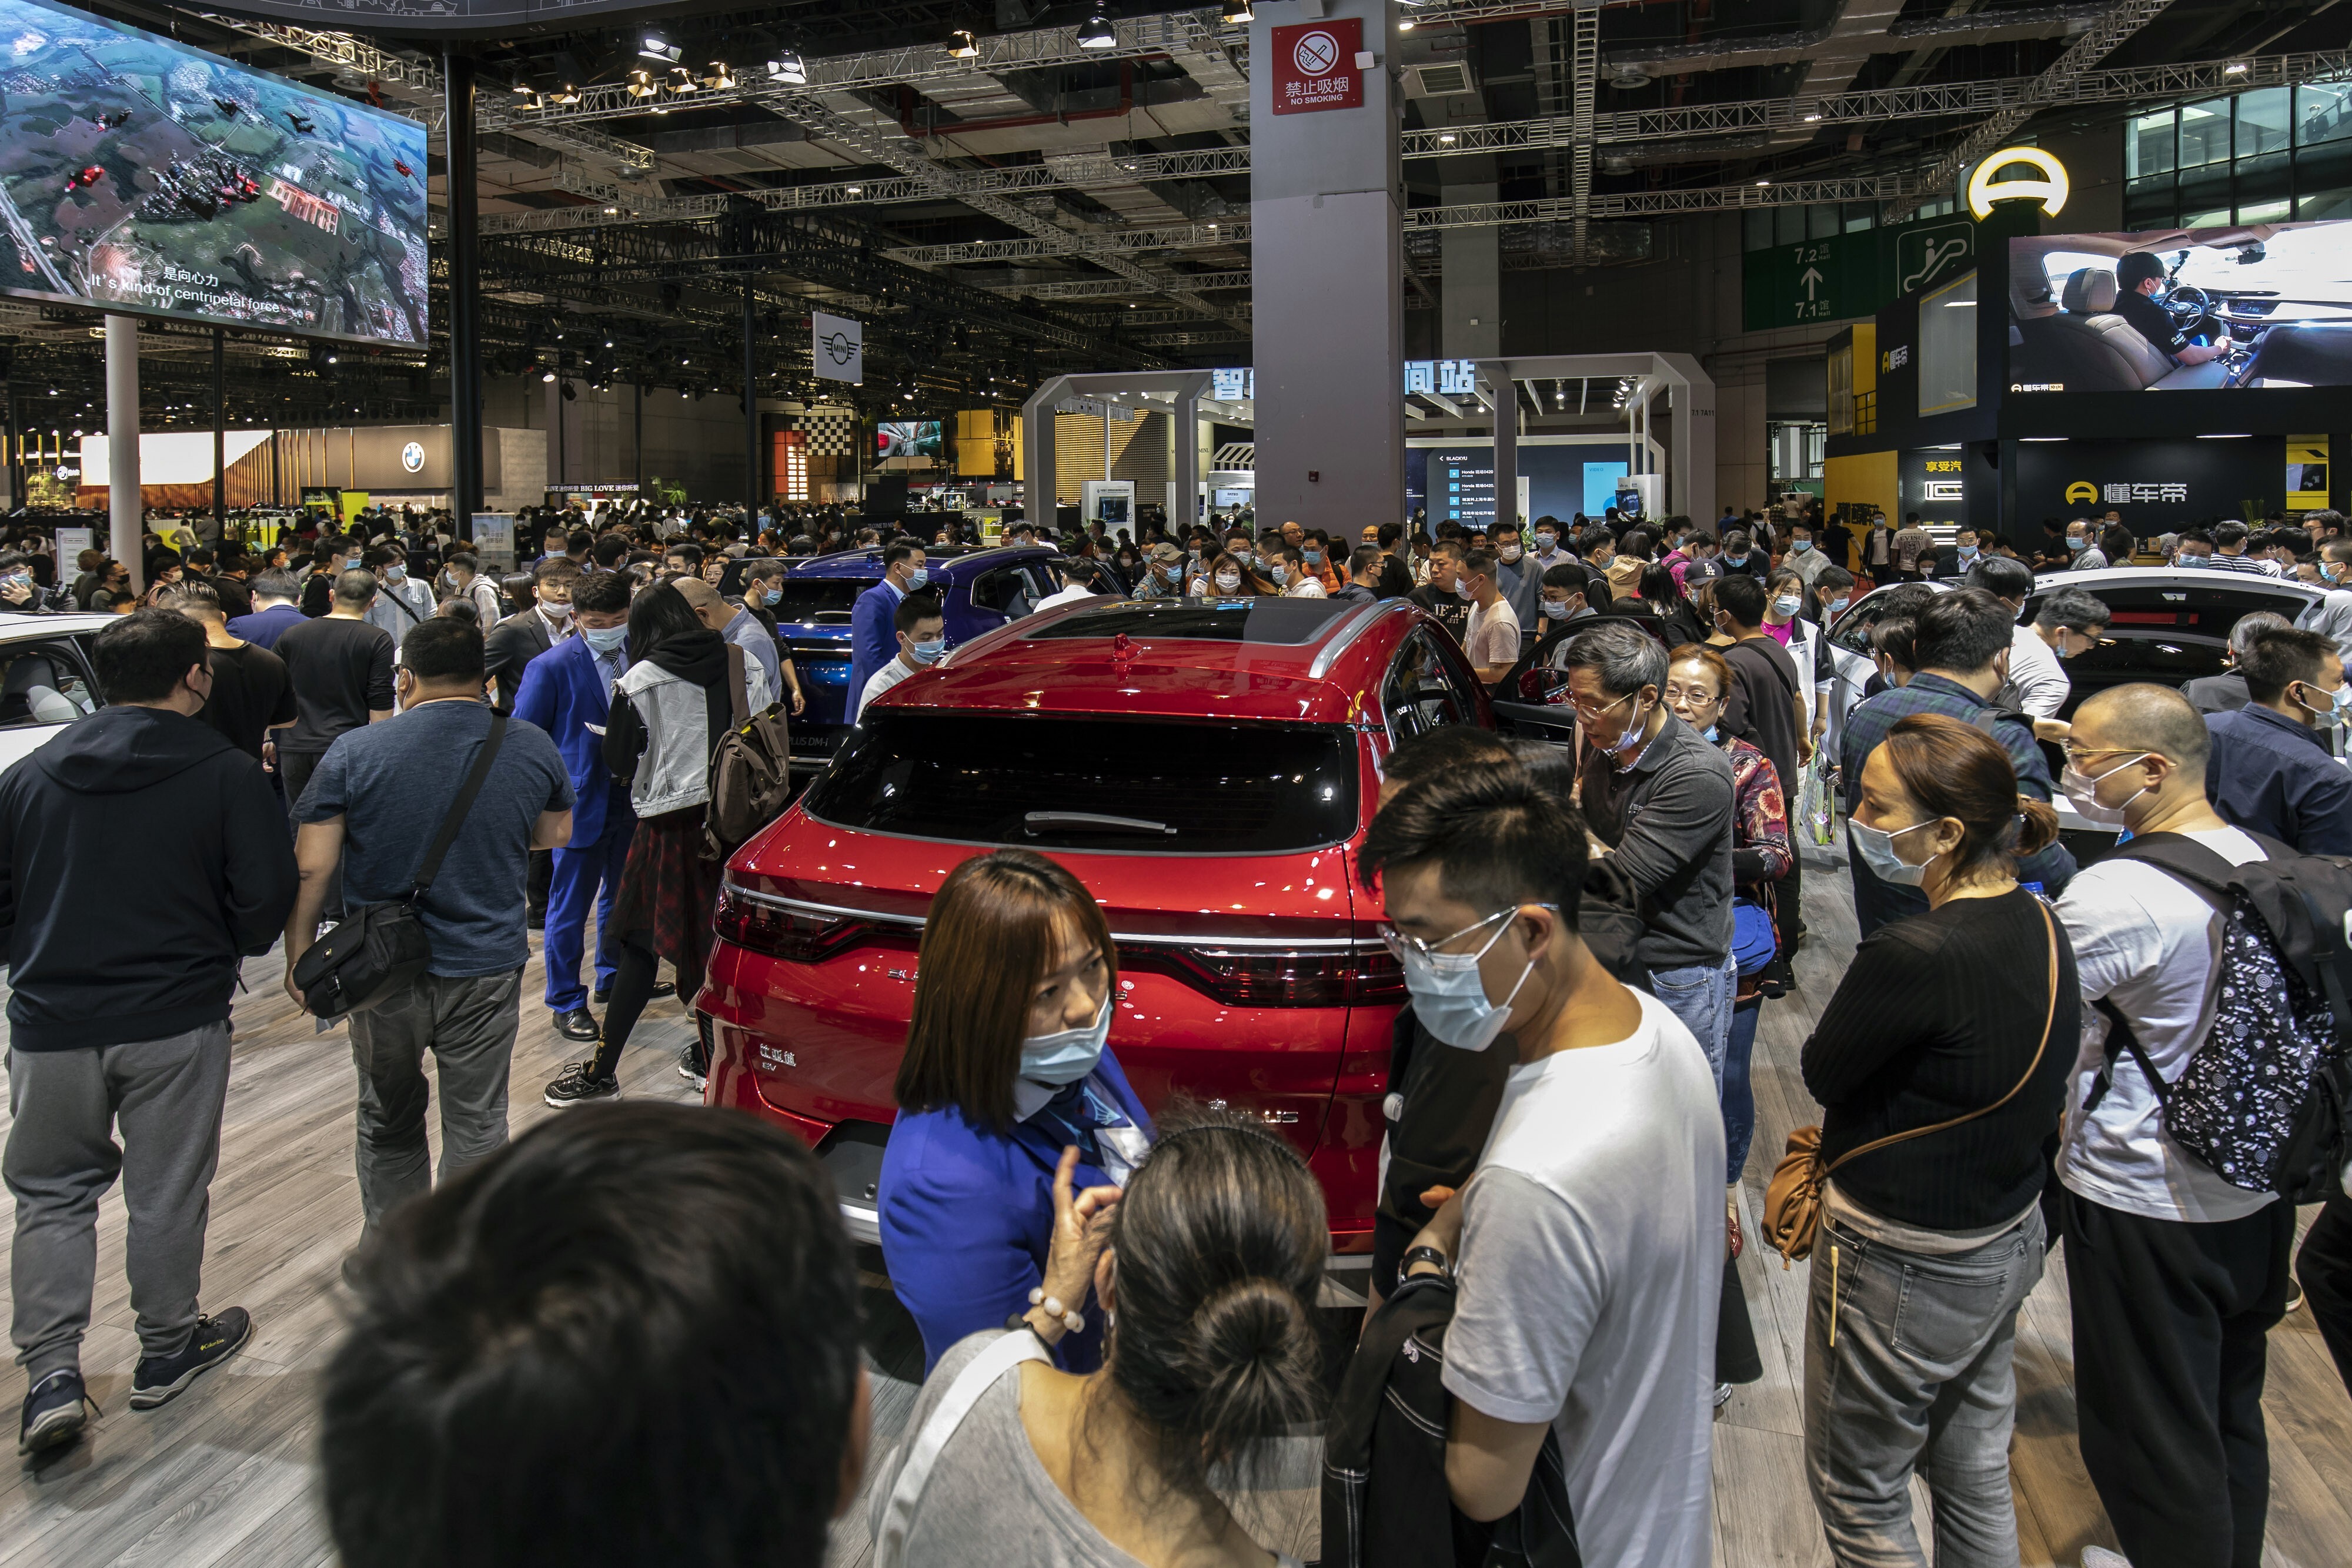 A crowd around an electric vehicle made by BYD during the Auto Shanghai 2021 trade fair show in China on Tuesday, April 27, 2021. Photo: Bloomberg